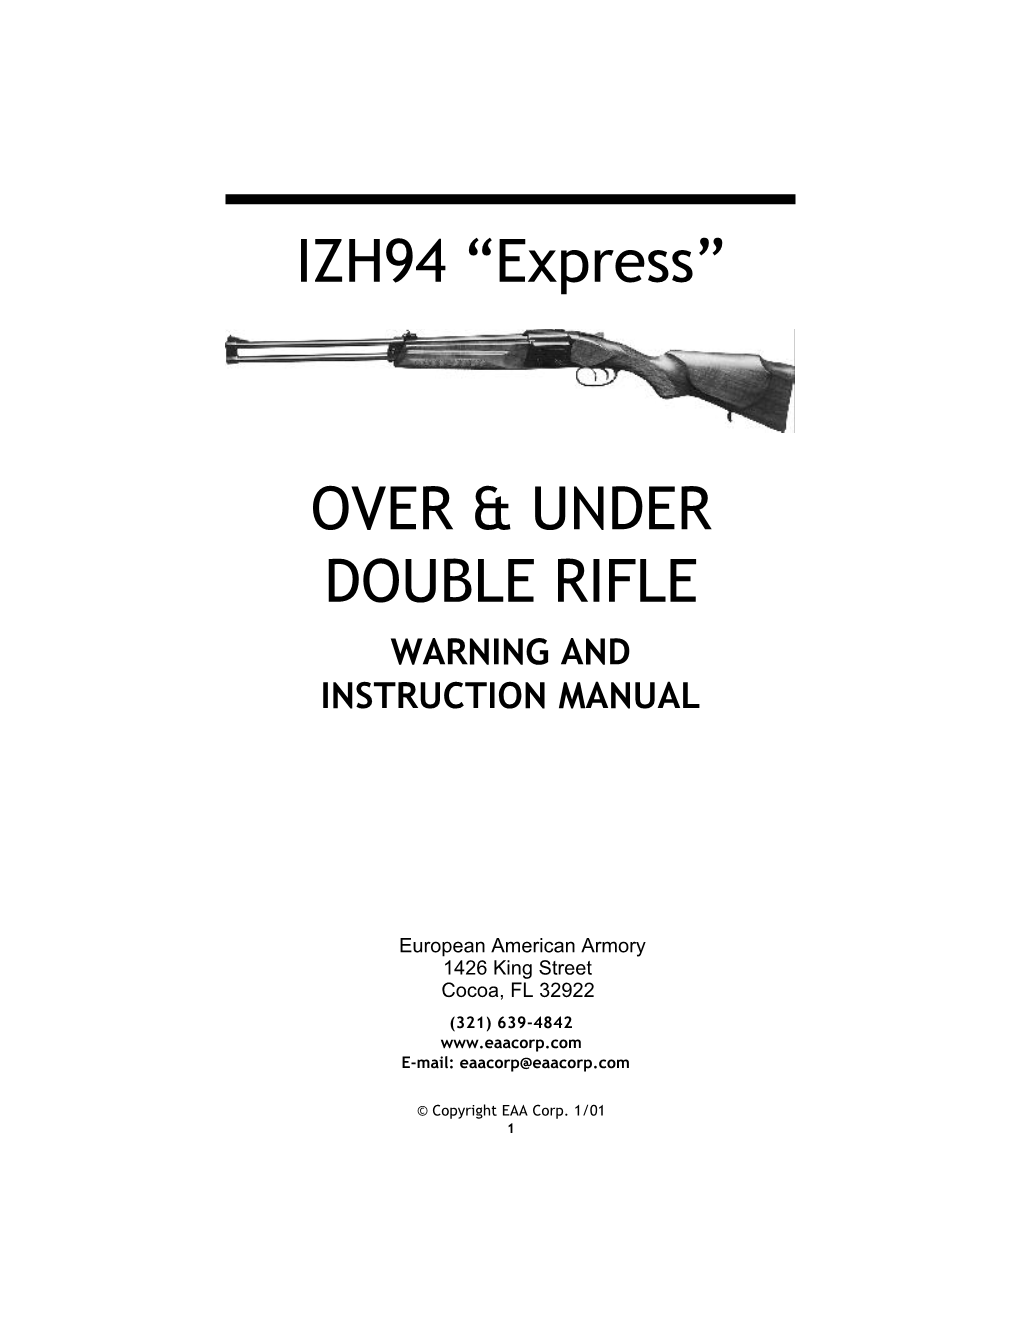 IZH94 “Express” OVER & UNDER DOUBLE RIFLE